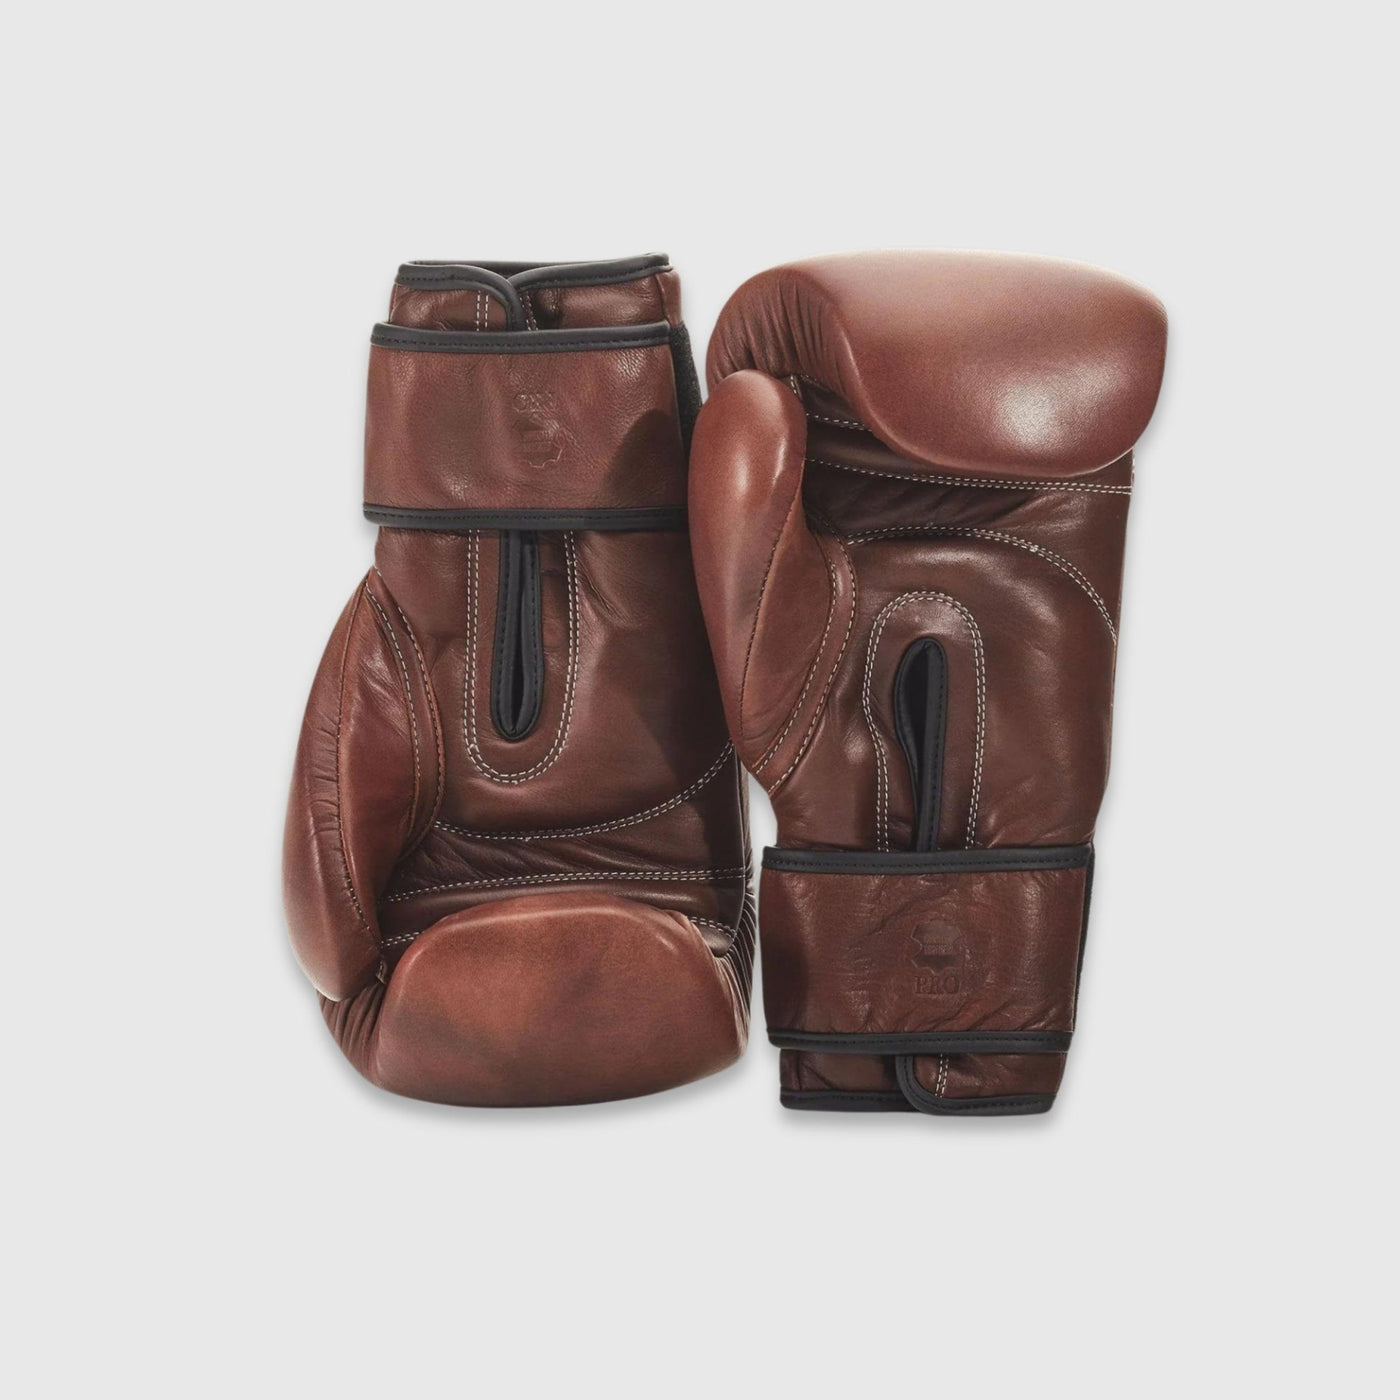 PRO Heritage Brown Wrecking Ball Leather Boxing Package (Strap Up) - MODEST VINTAGE PLAYER LTD